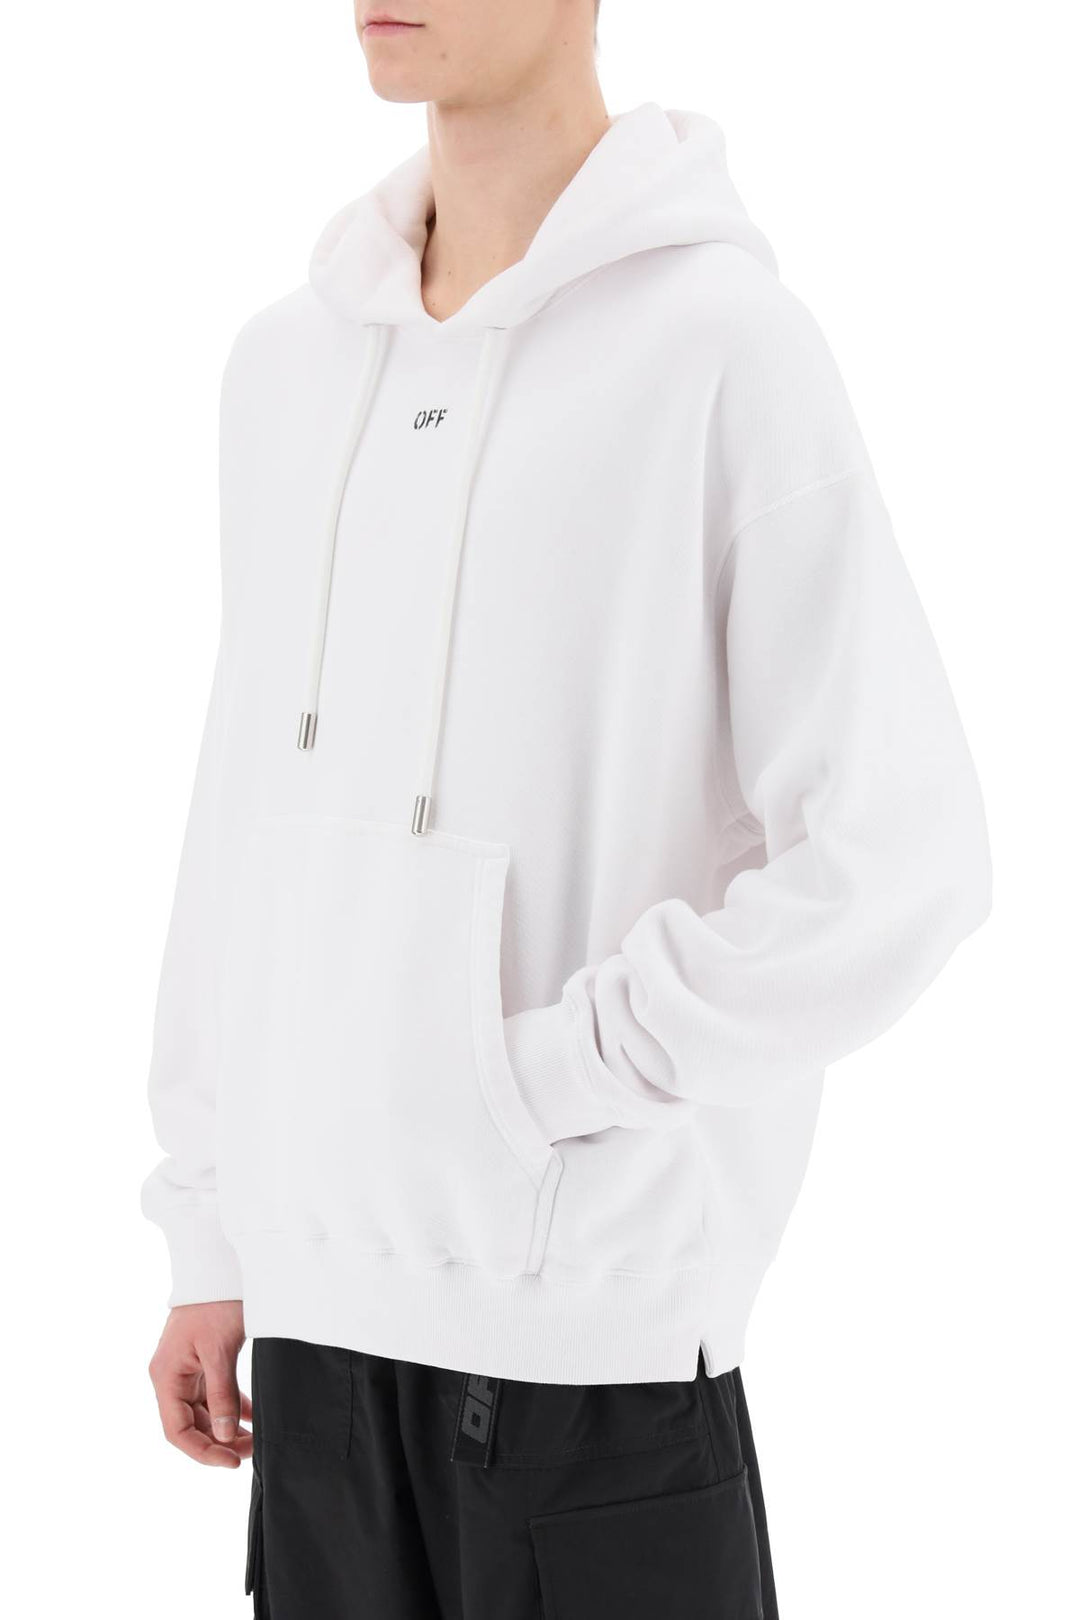 Off White Skate Hoodie With Off Logo   Bianco